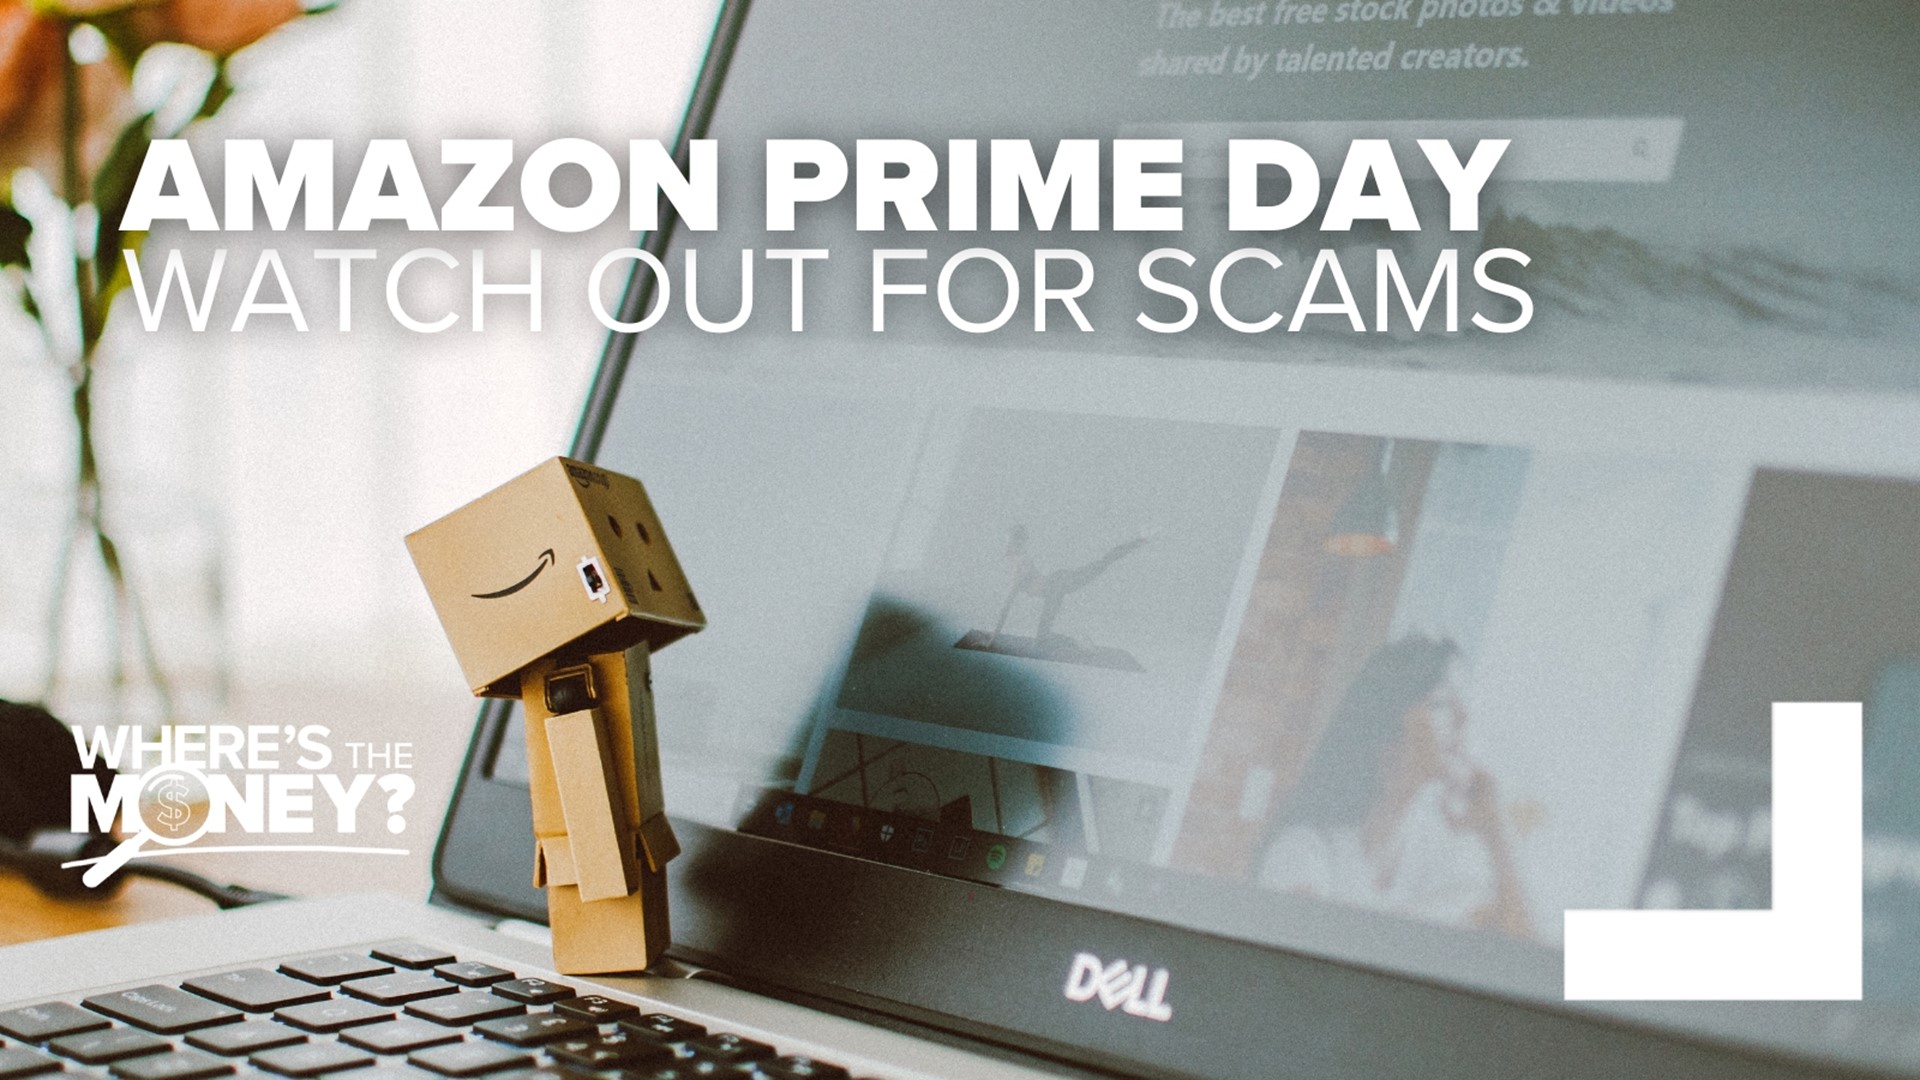 Meet the Typical Shopper Who Participated in  Prime Day 2023